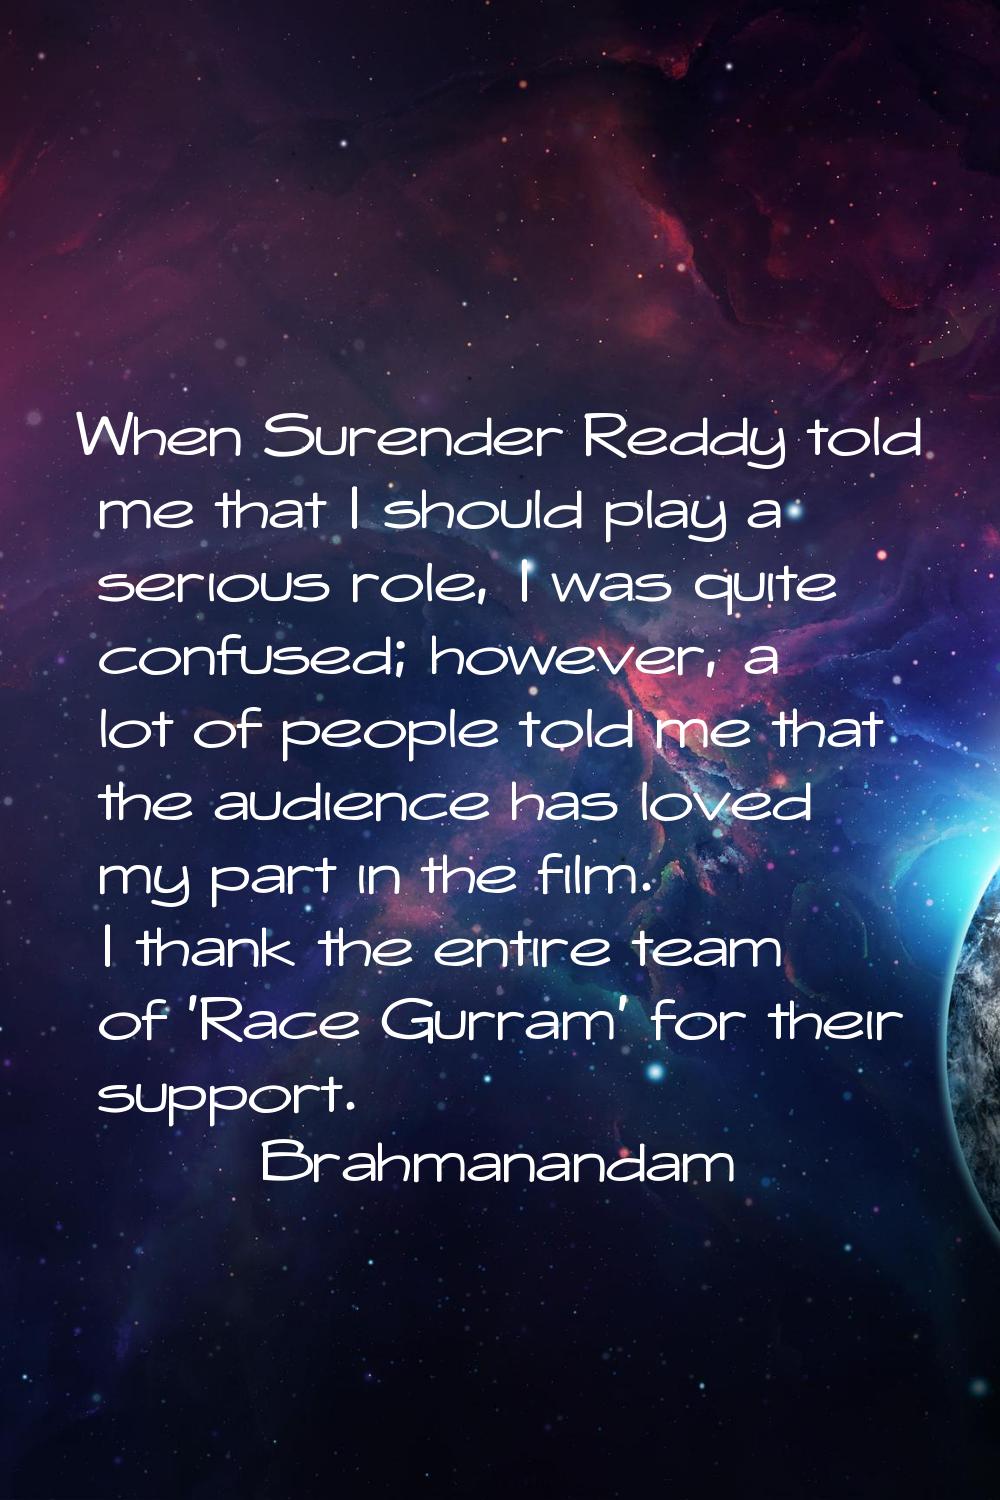 When Surender Reddy told me that I should play a serious role, I was quite confused; however, a lot